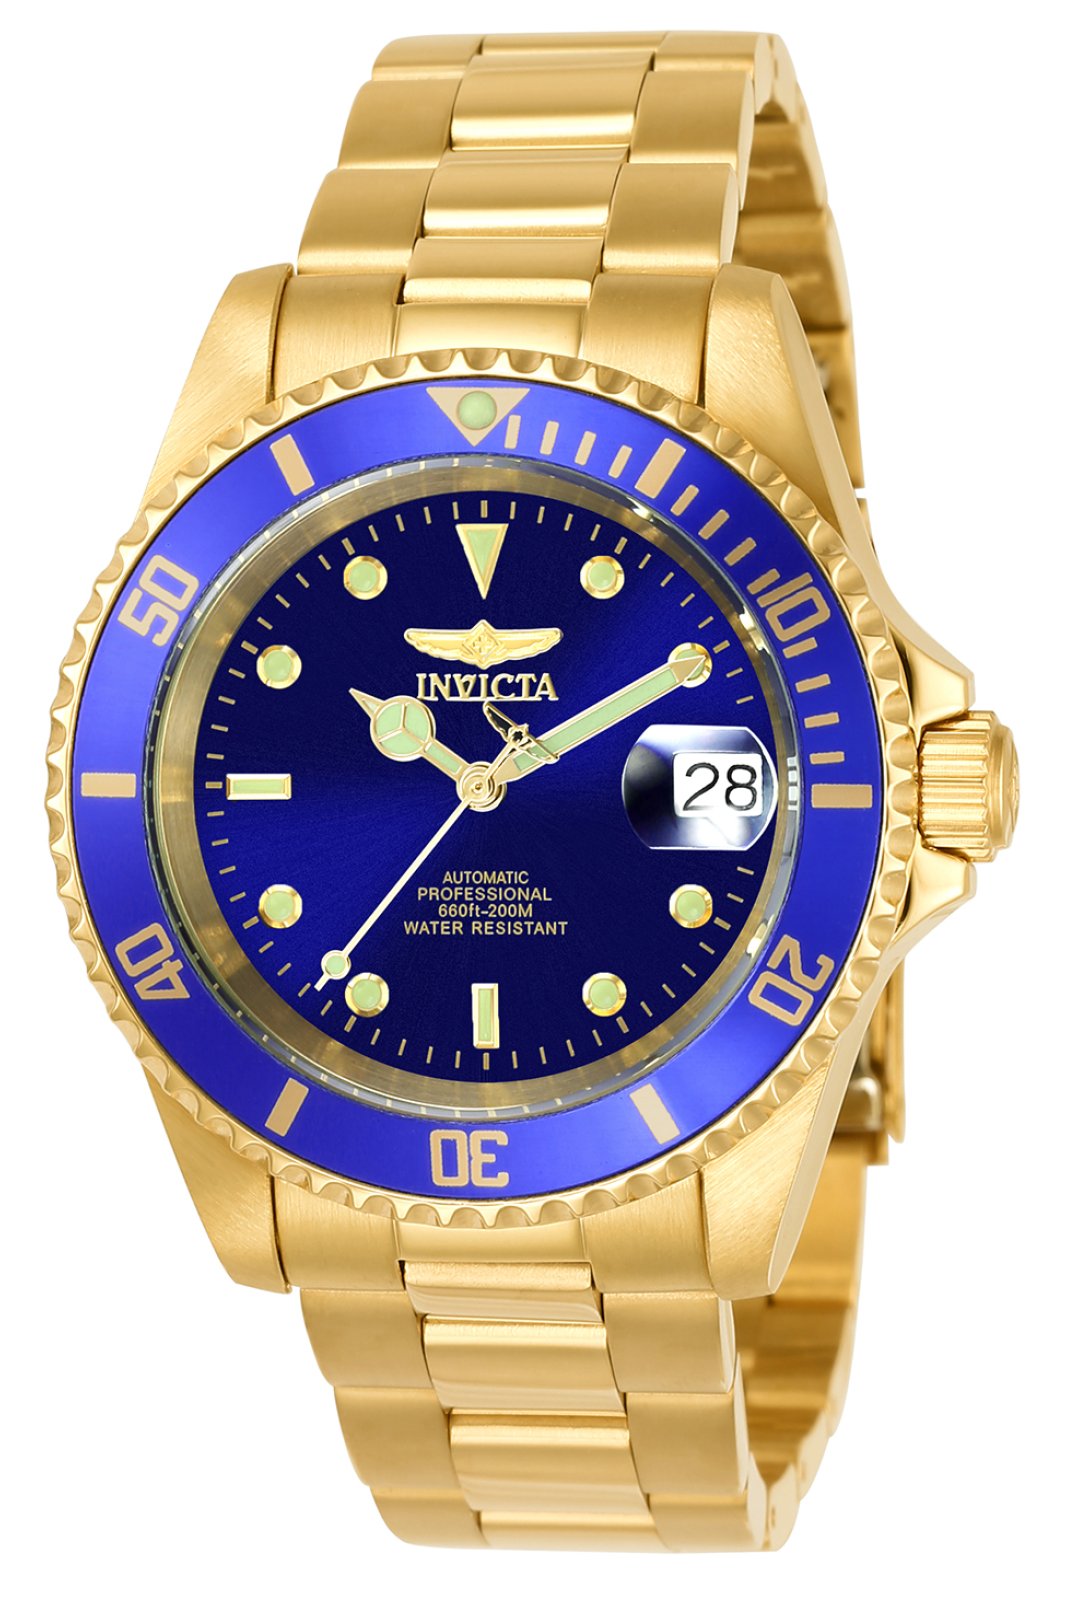 Watch 8930OB Official Invicta Store - Buy Online!